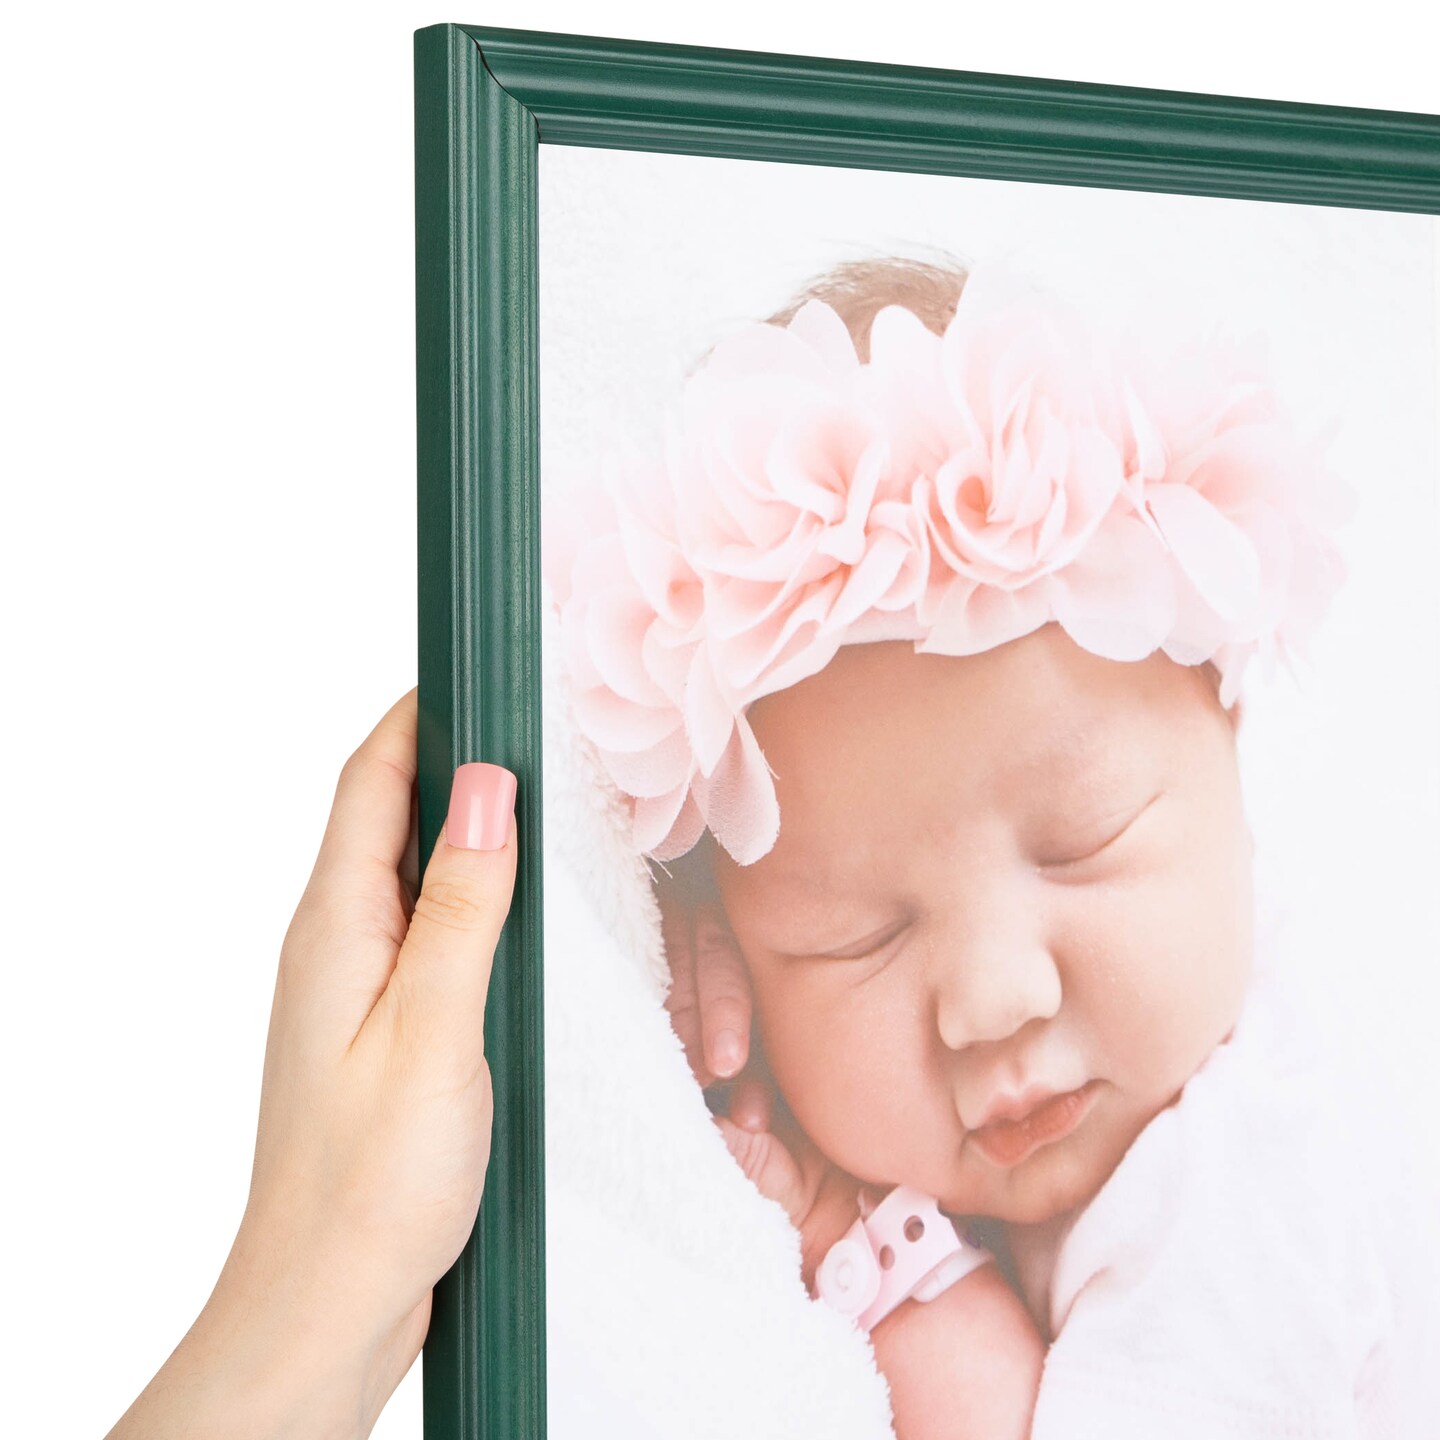 ArtToFrames 12x20 Inch  Picture Frame, This 1 Inch Custom Wood Poster Frame is Available in Multiple Colors, Great for Your Art or Photos - Comes with Regular Glass and  Corrugated Backing (A9IK)